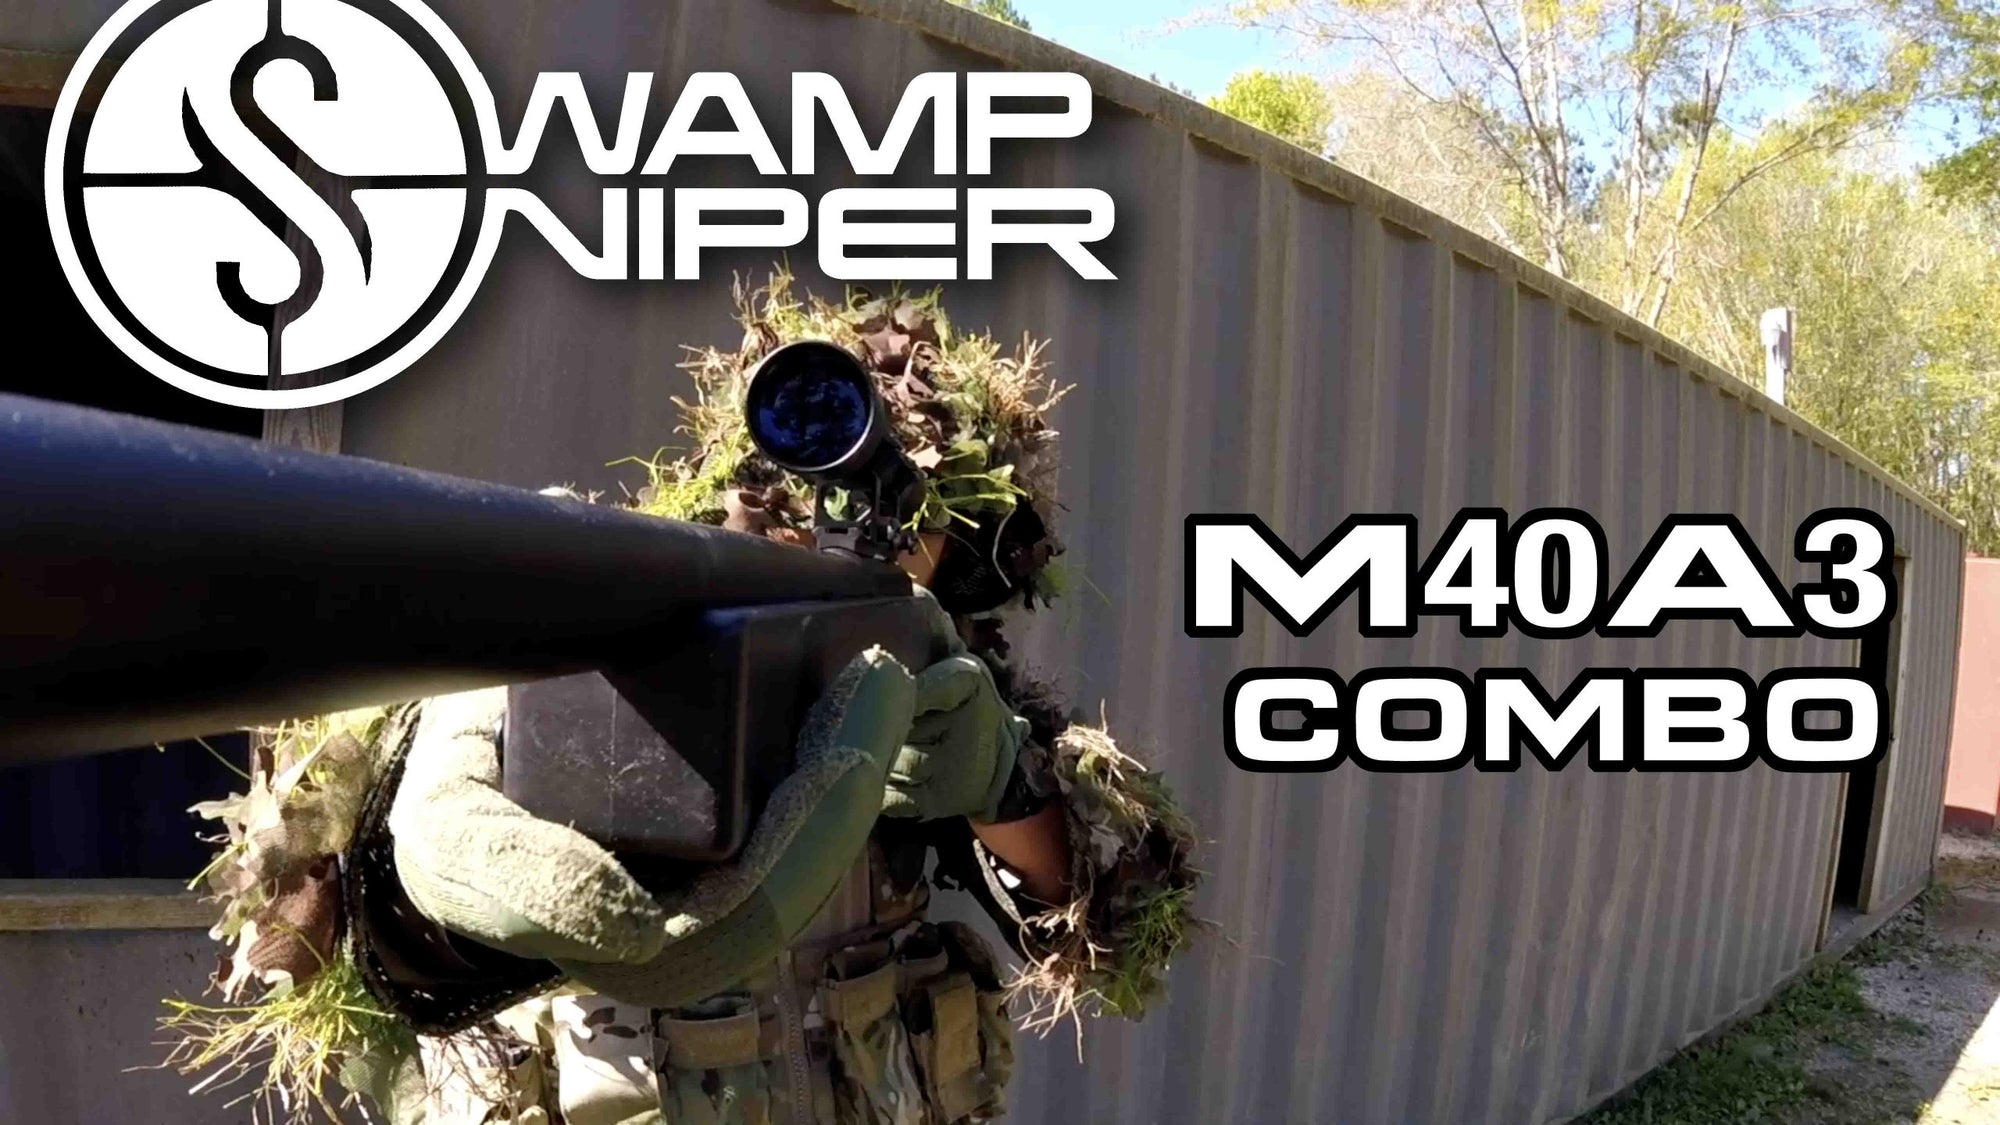 SWAMP SNIPER M40A3 package airsoft sniper rifle